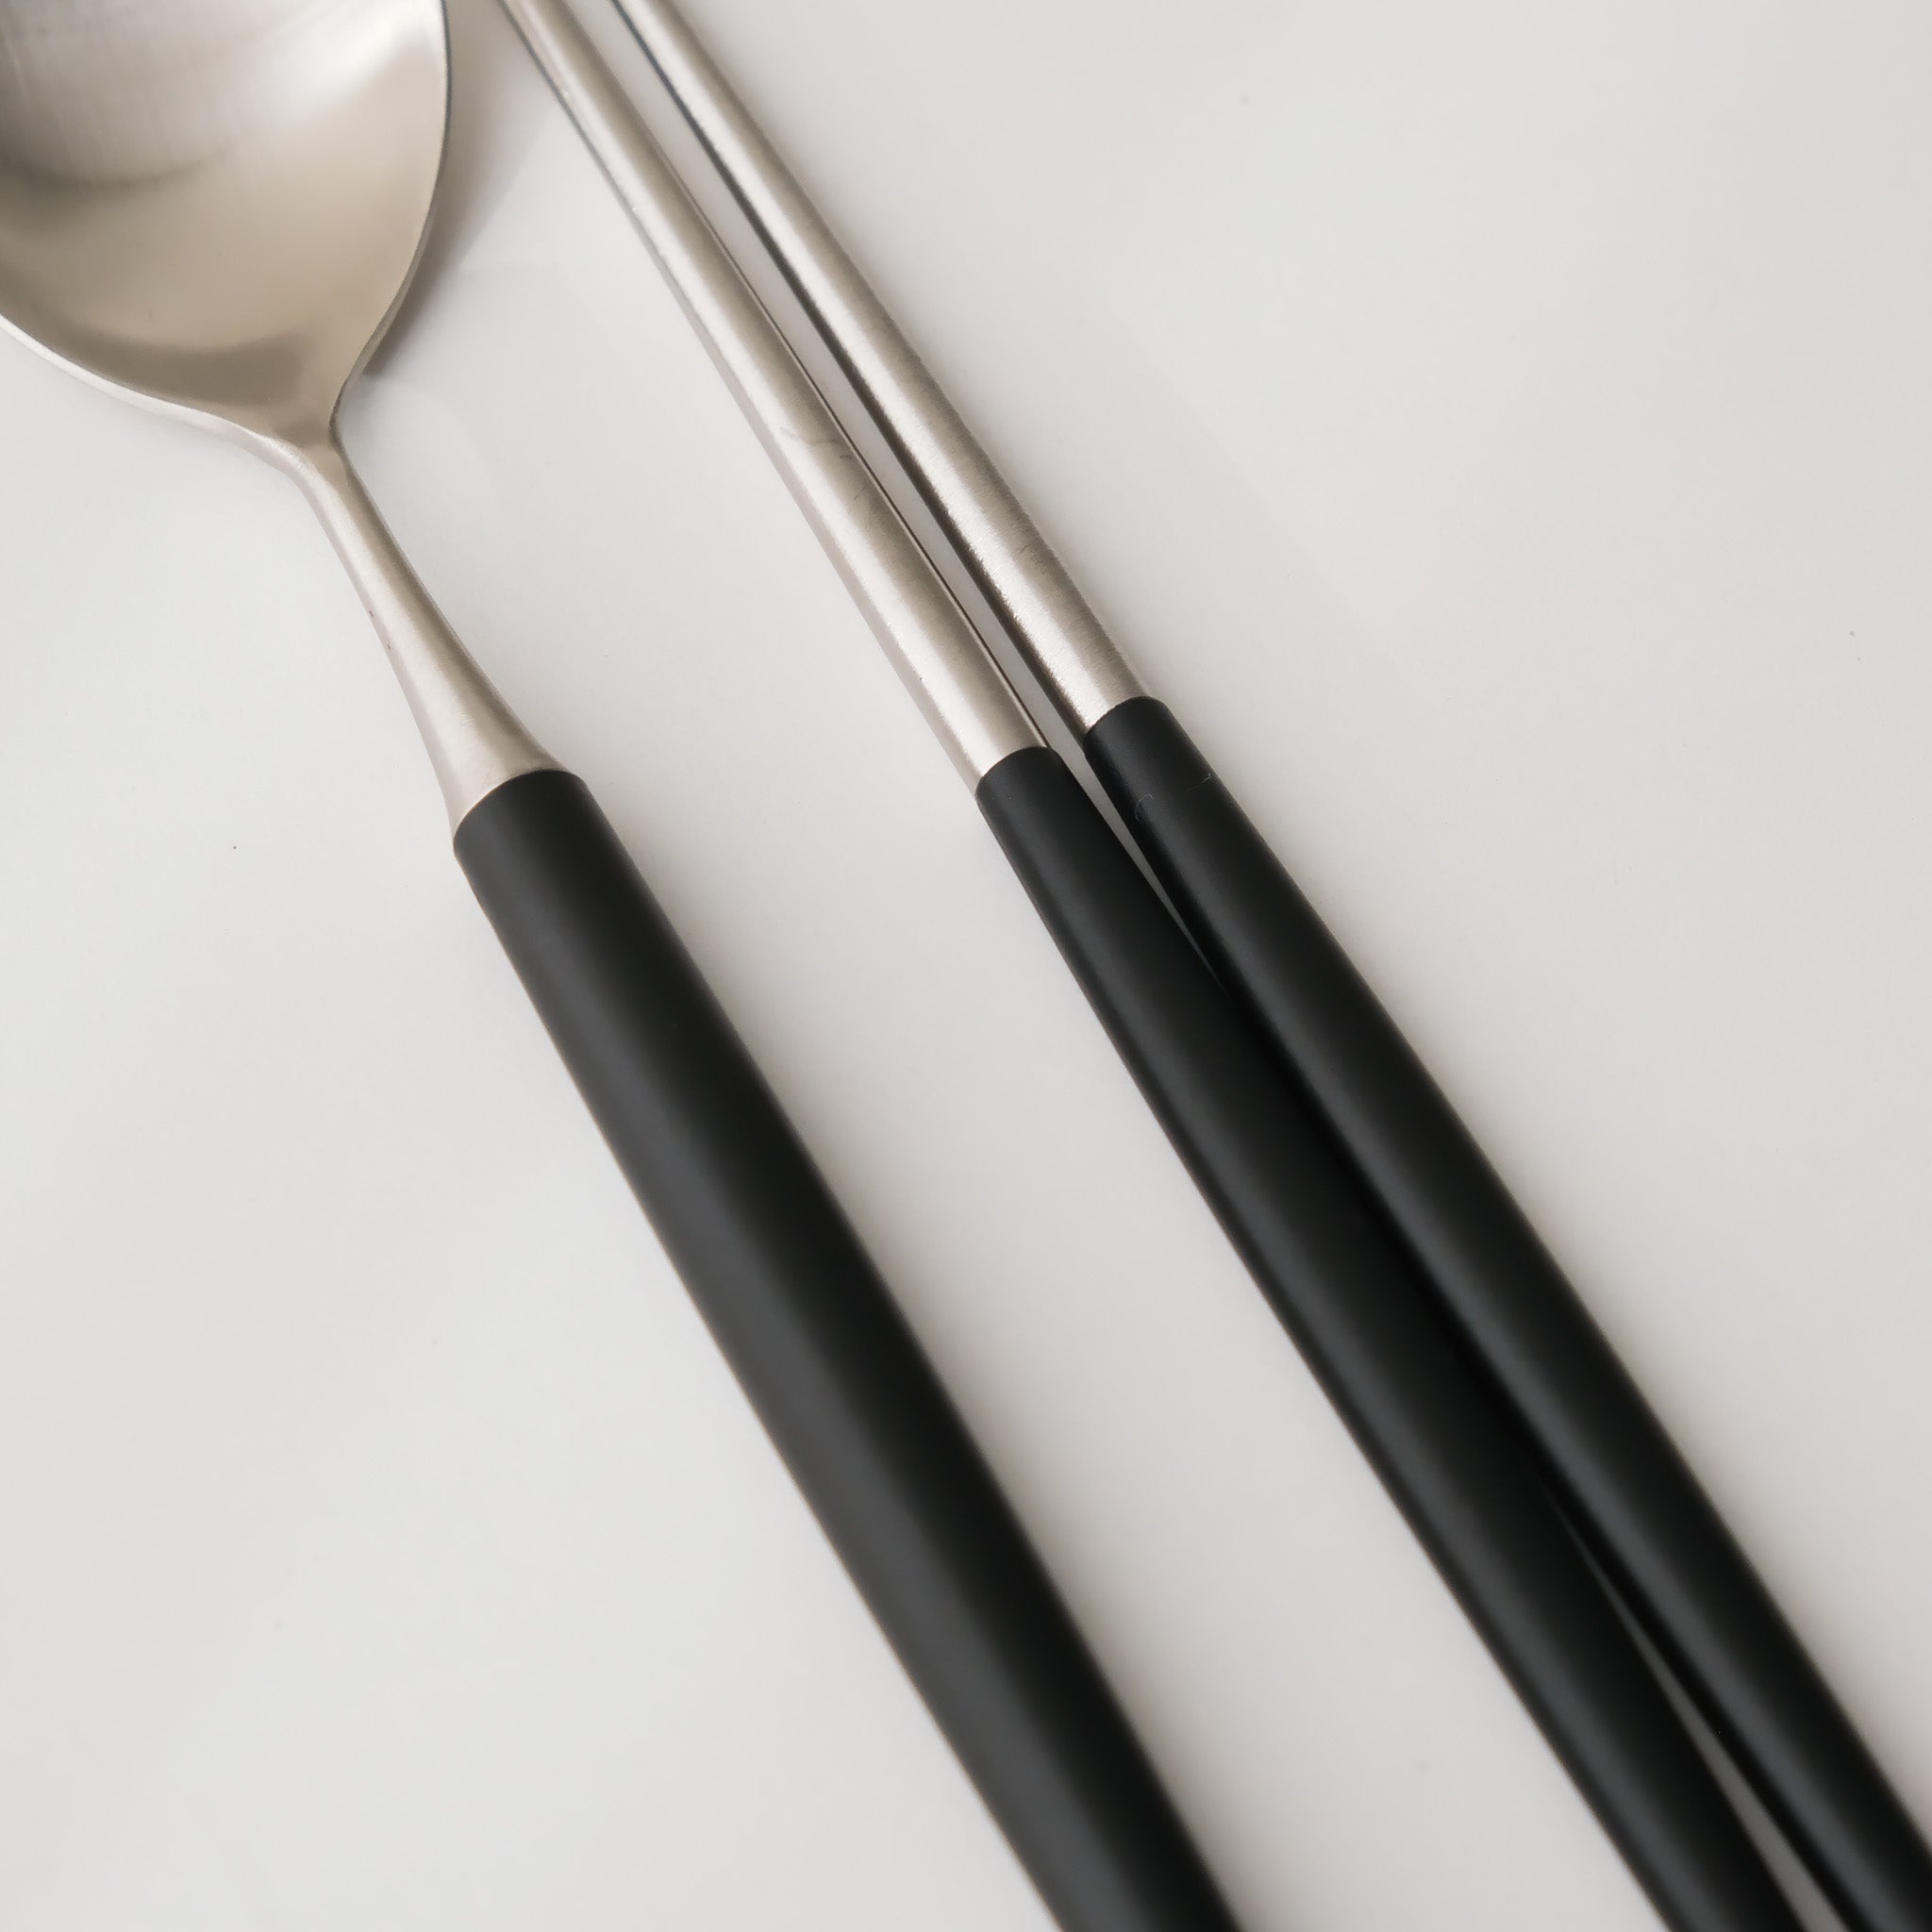 Dustin Spoon and Chopstick Set